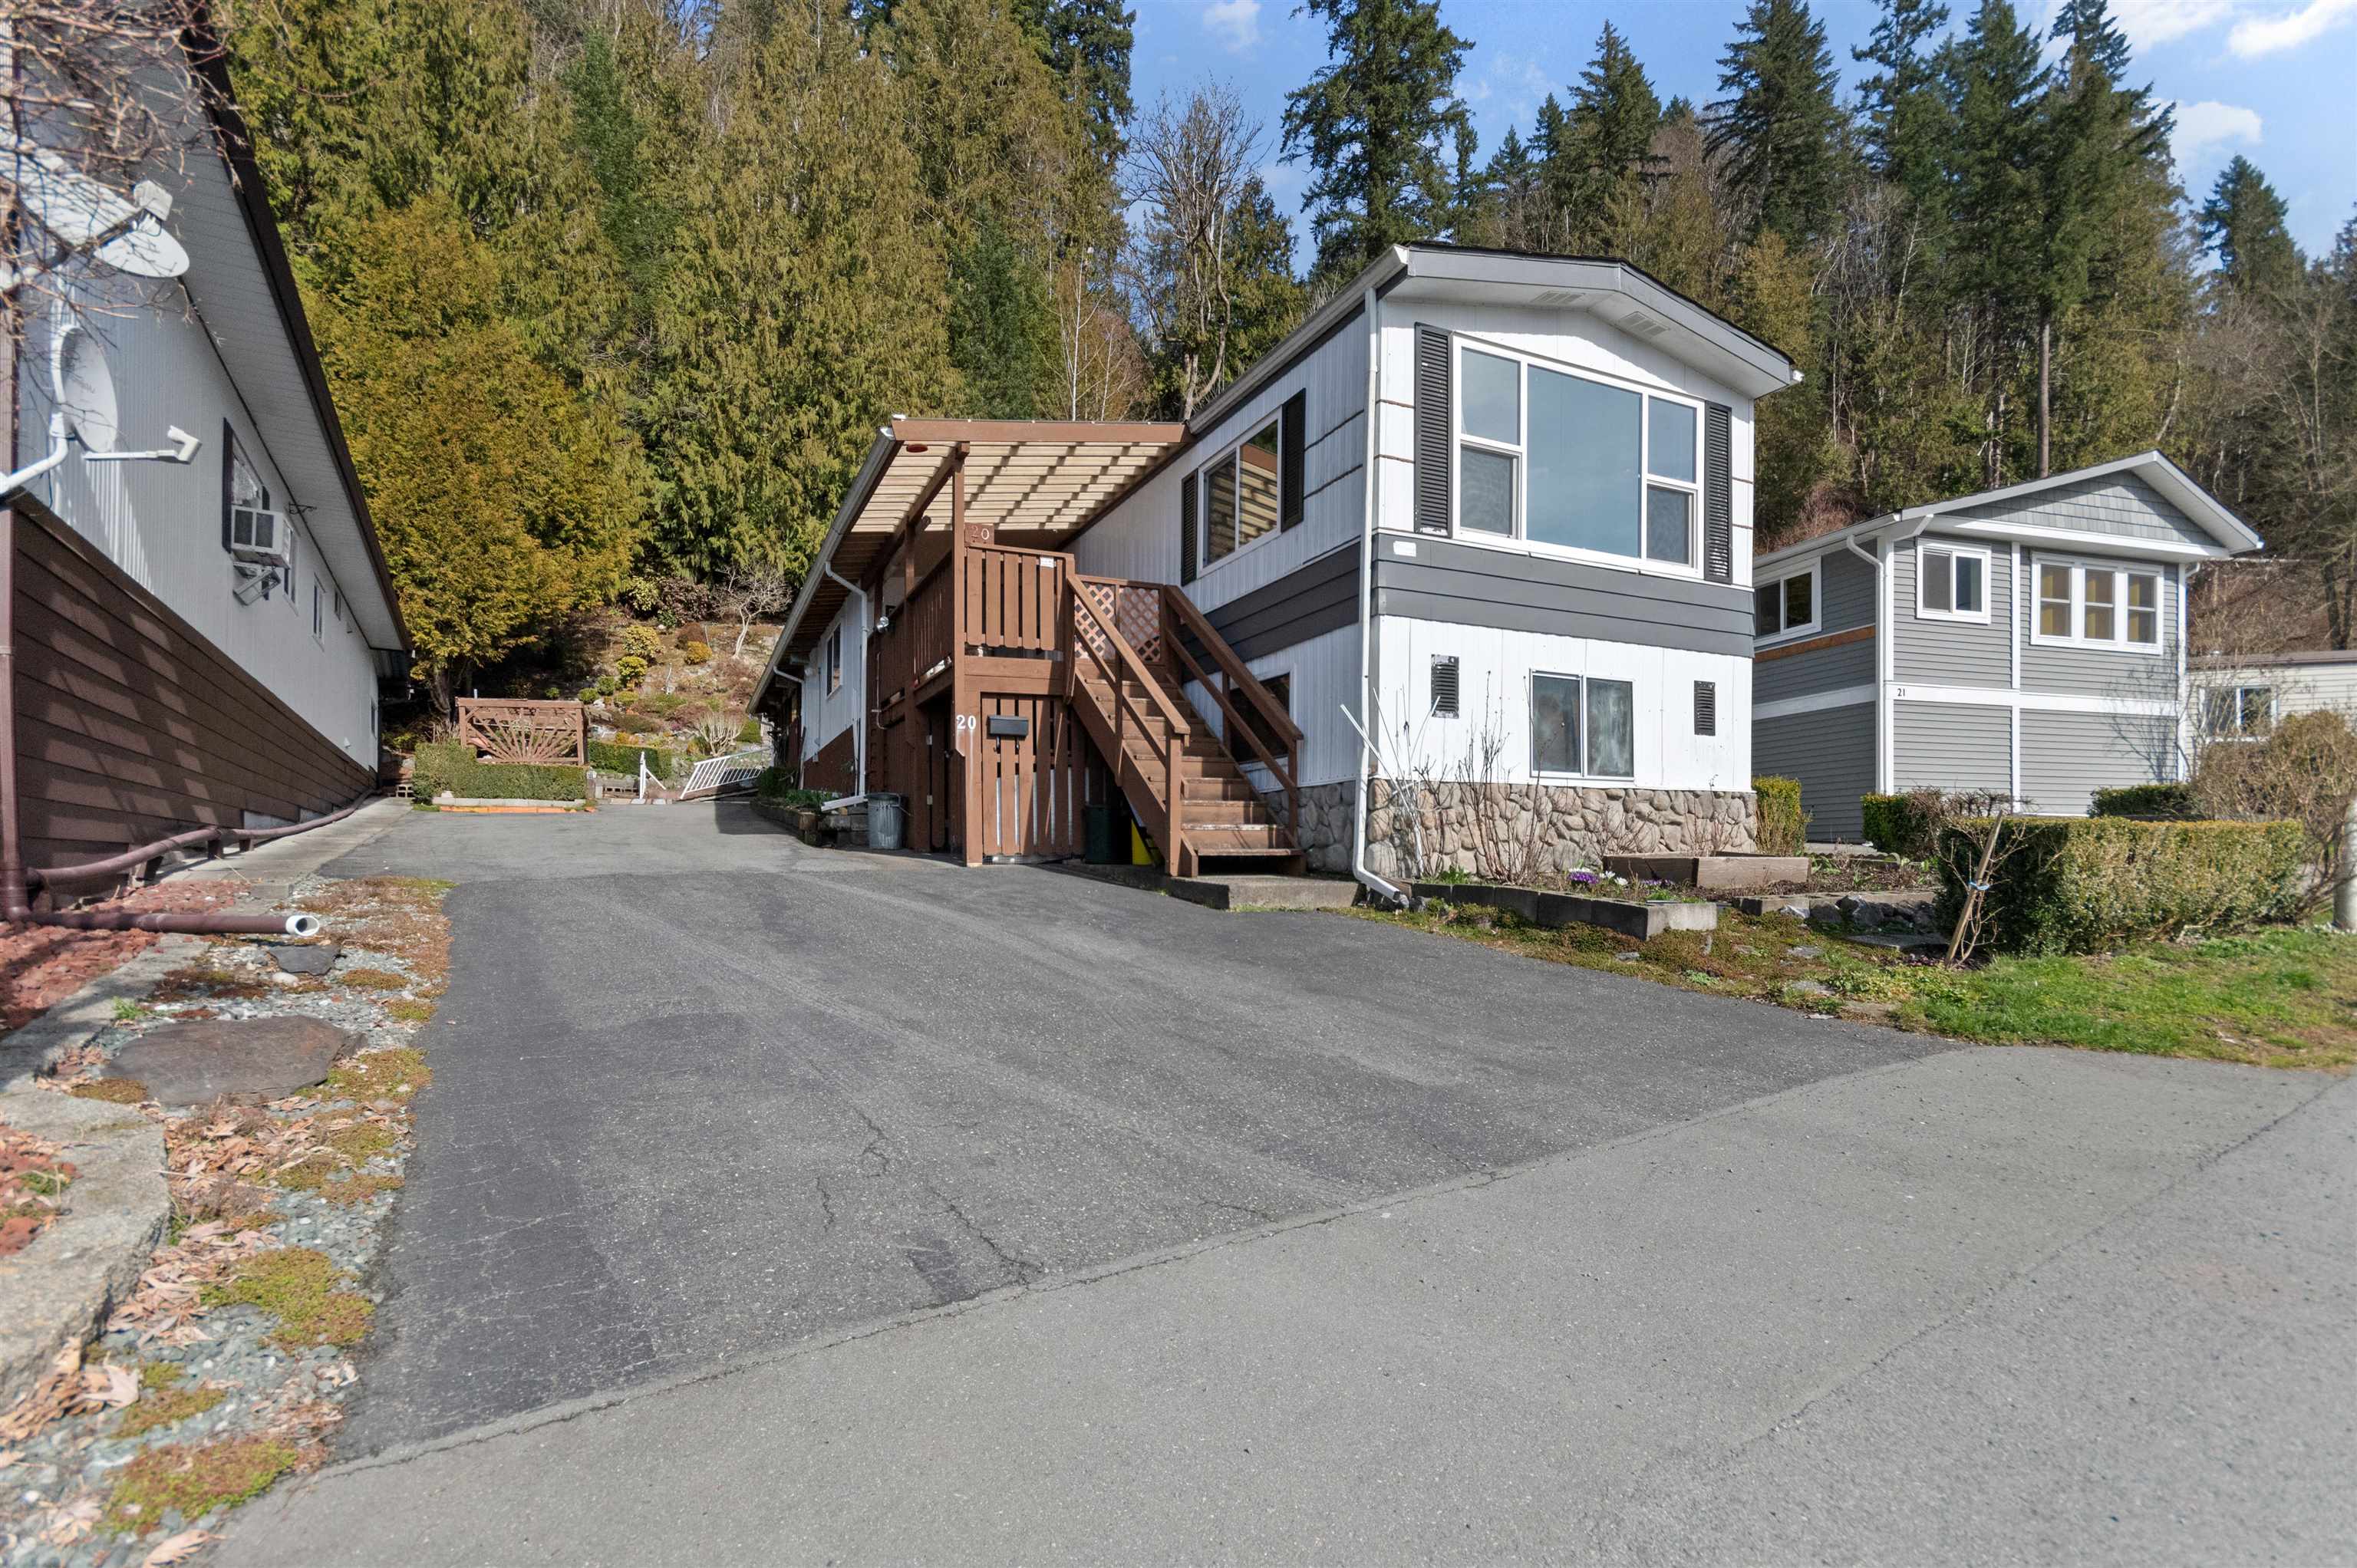 Chilliwack River Valley House/Single Family for sale:  2 bedroom 1,085 sq.ft. (Listed 2106-02-06)